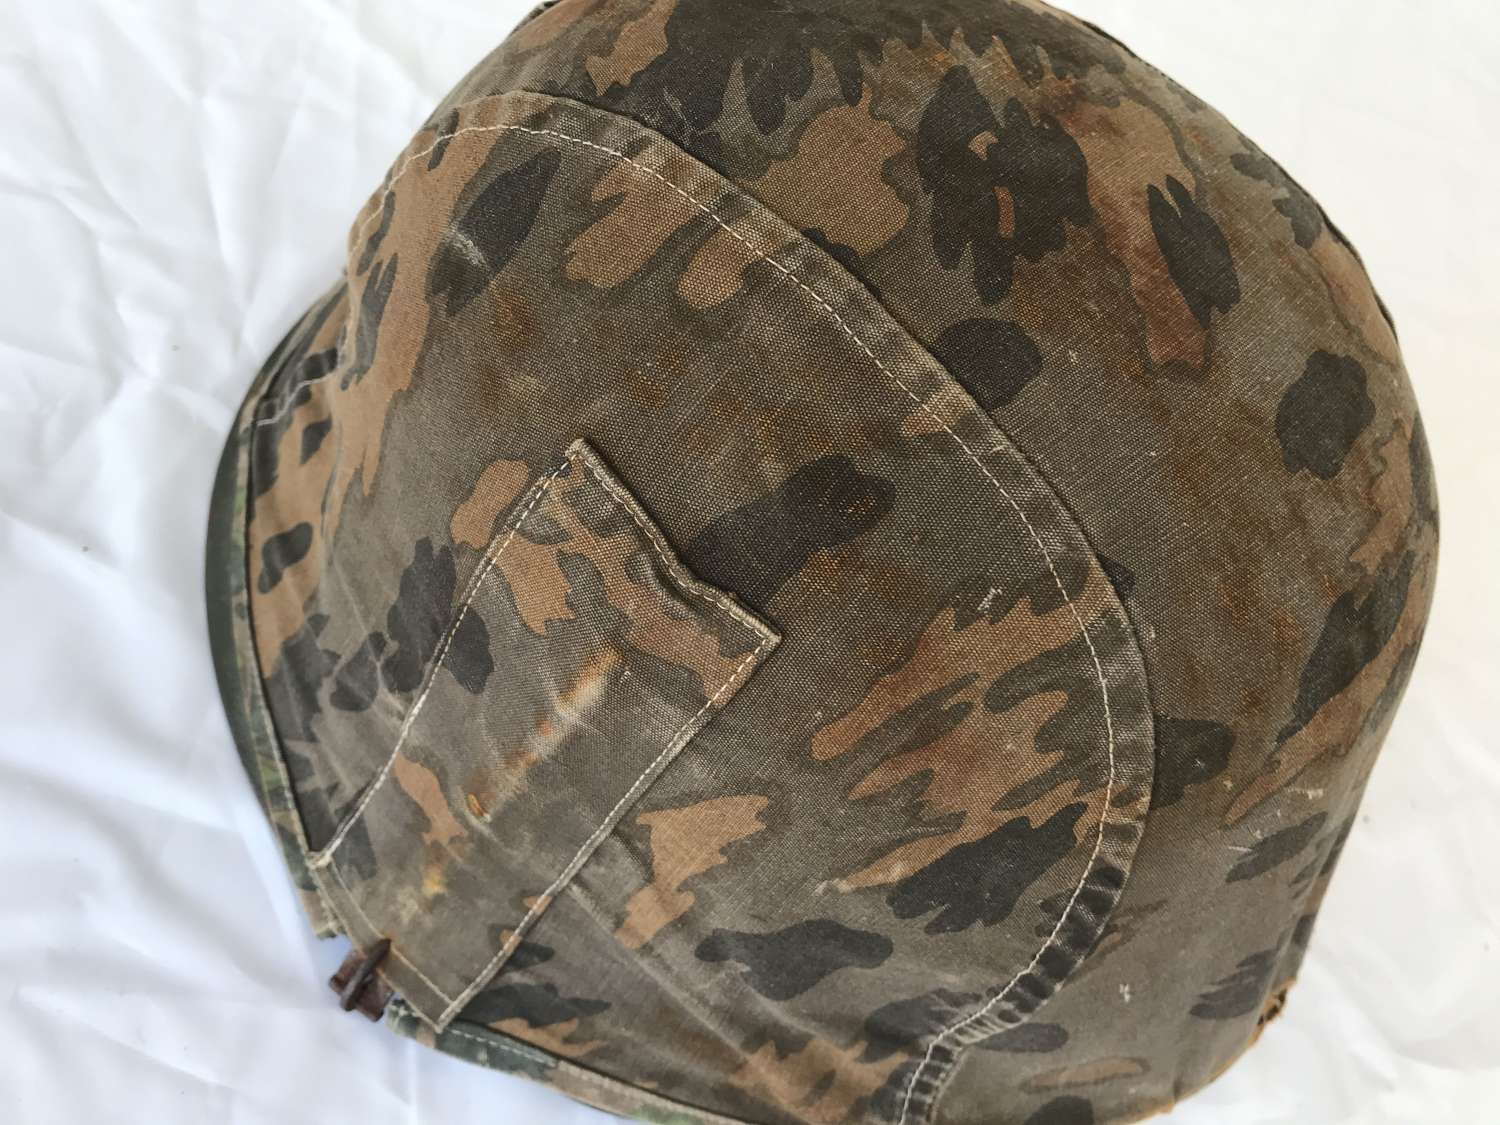 Reproduction Waffen Ss helmet with Camo cover